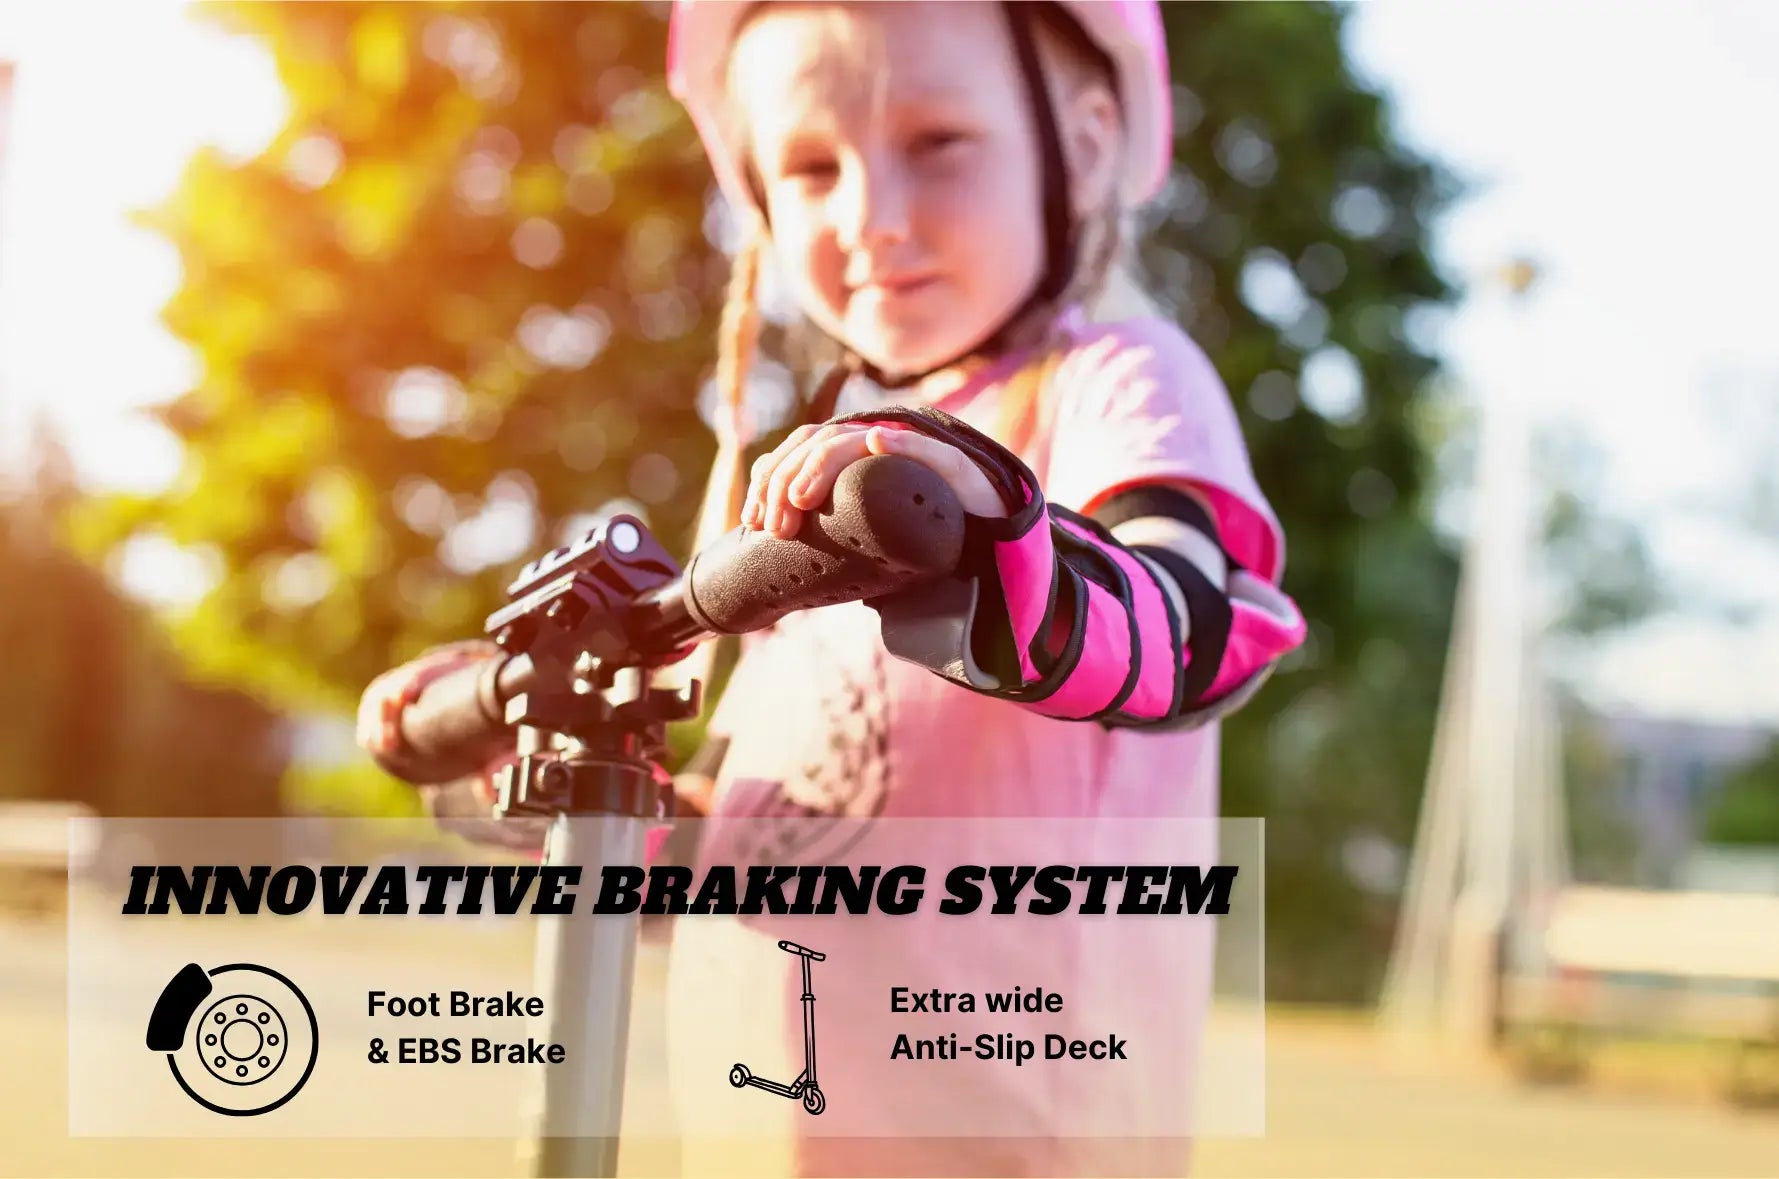 Our kids electric scooters have smooth braking for ultimate safety